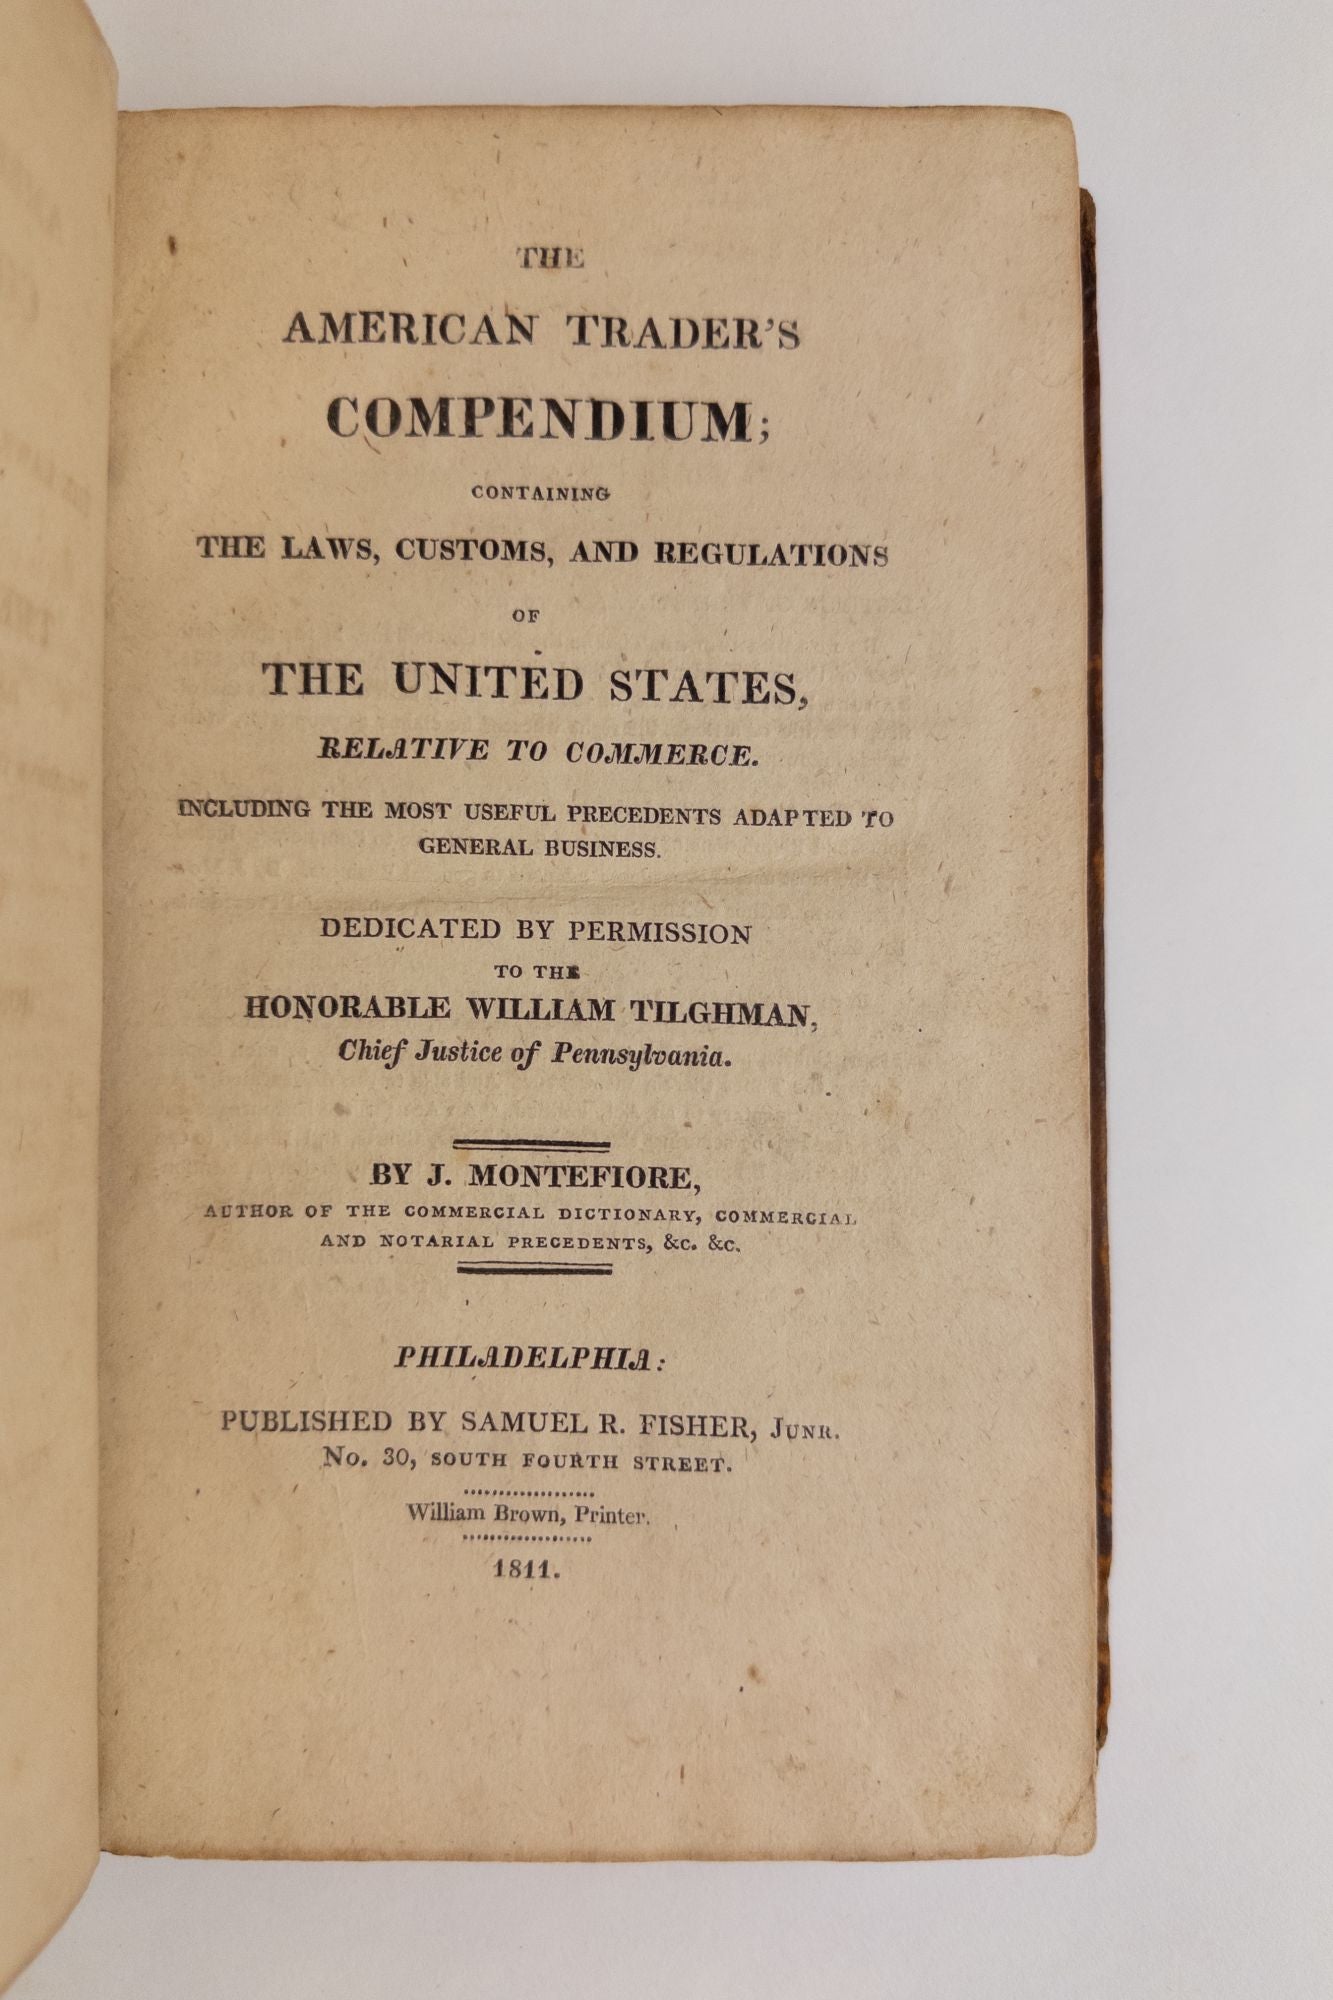 Product Image for THE AMERICAN TRADER'S COMPENDIUM; CONTAINING THE LAWS, CUSTOMS, AND REGULATIONS OF THE UNITED STATES, RELATIVE TO COMMERCE